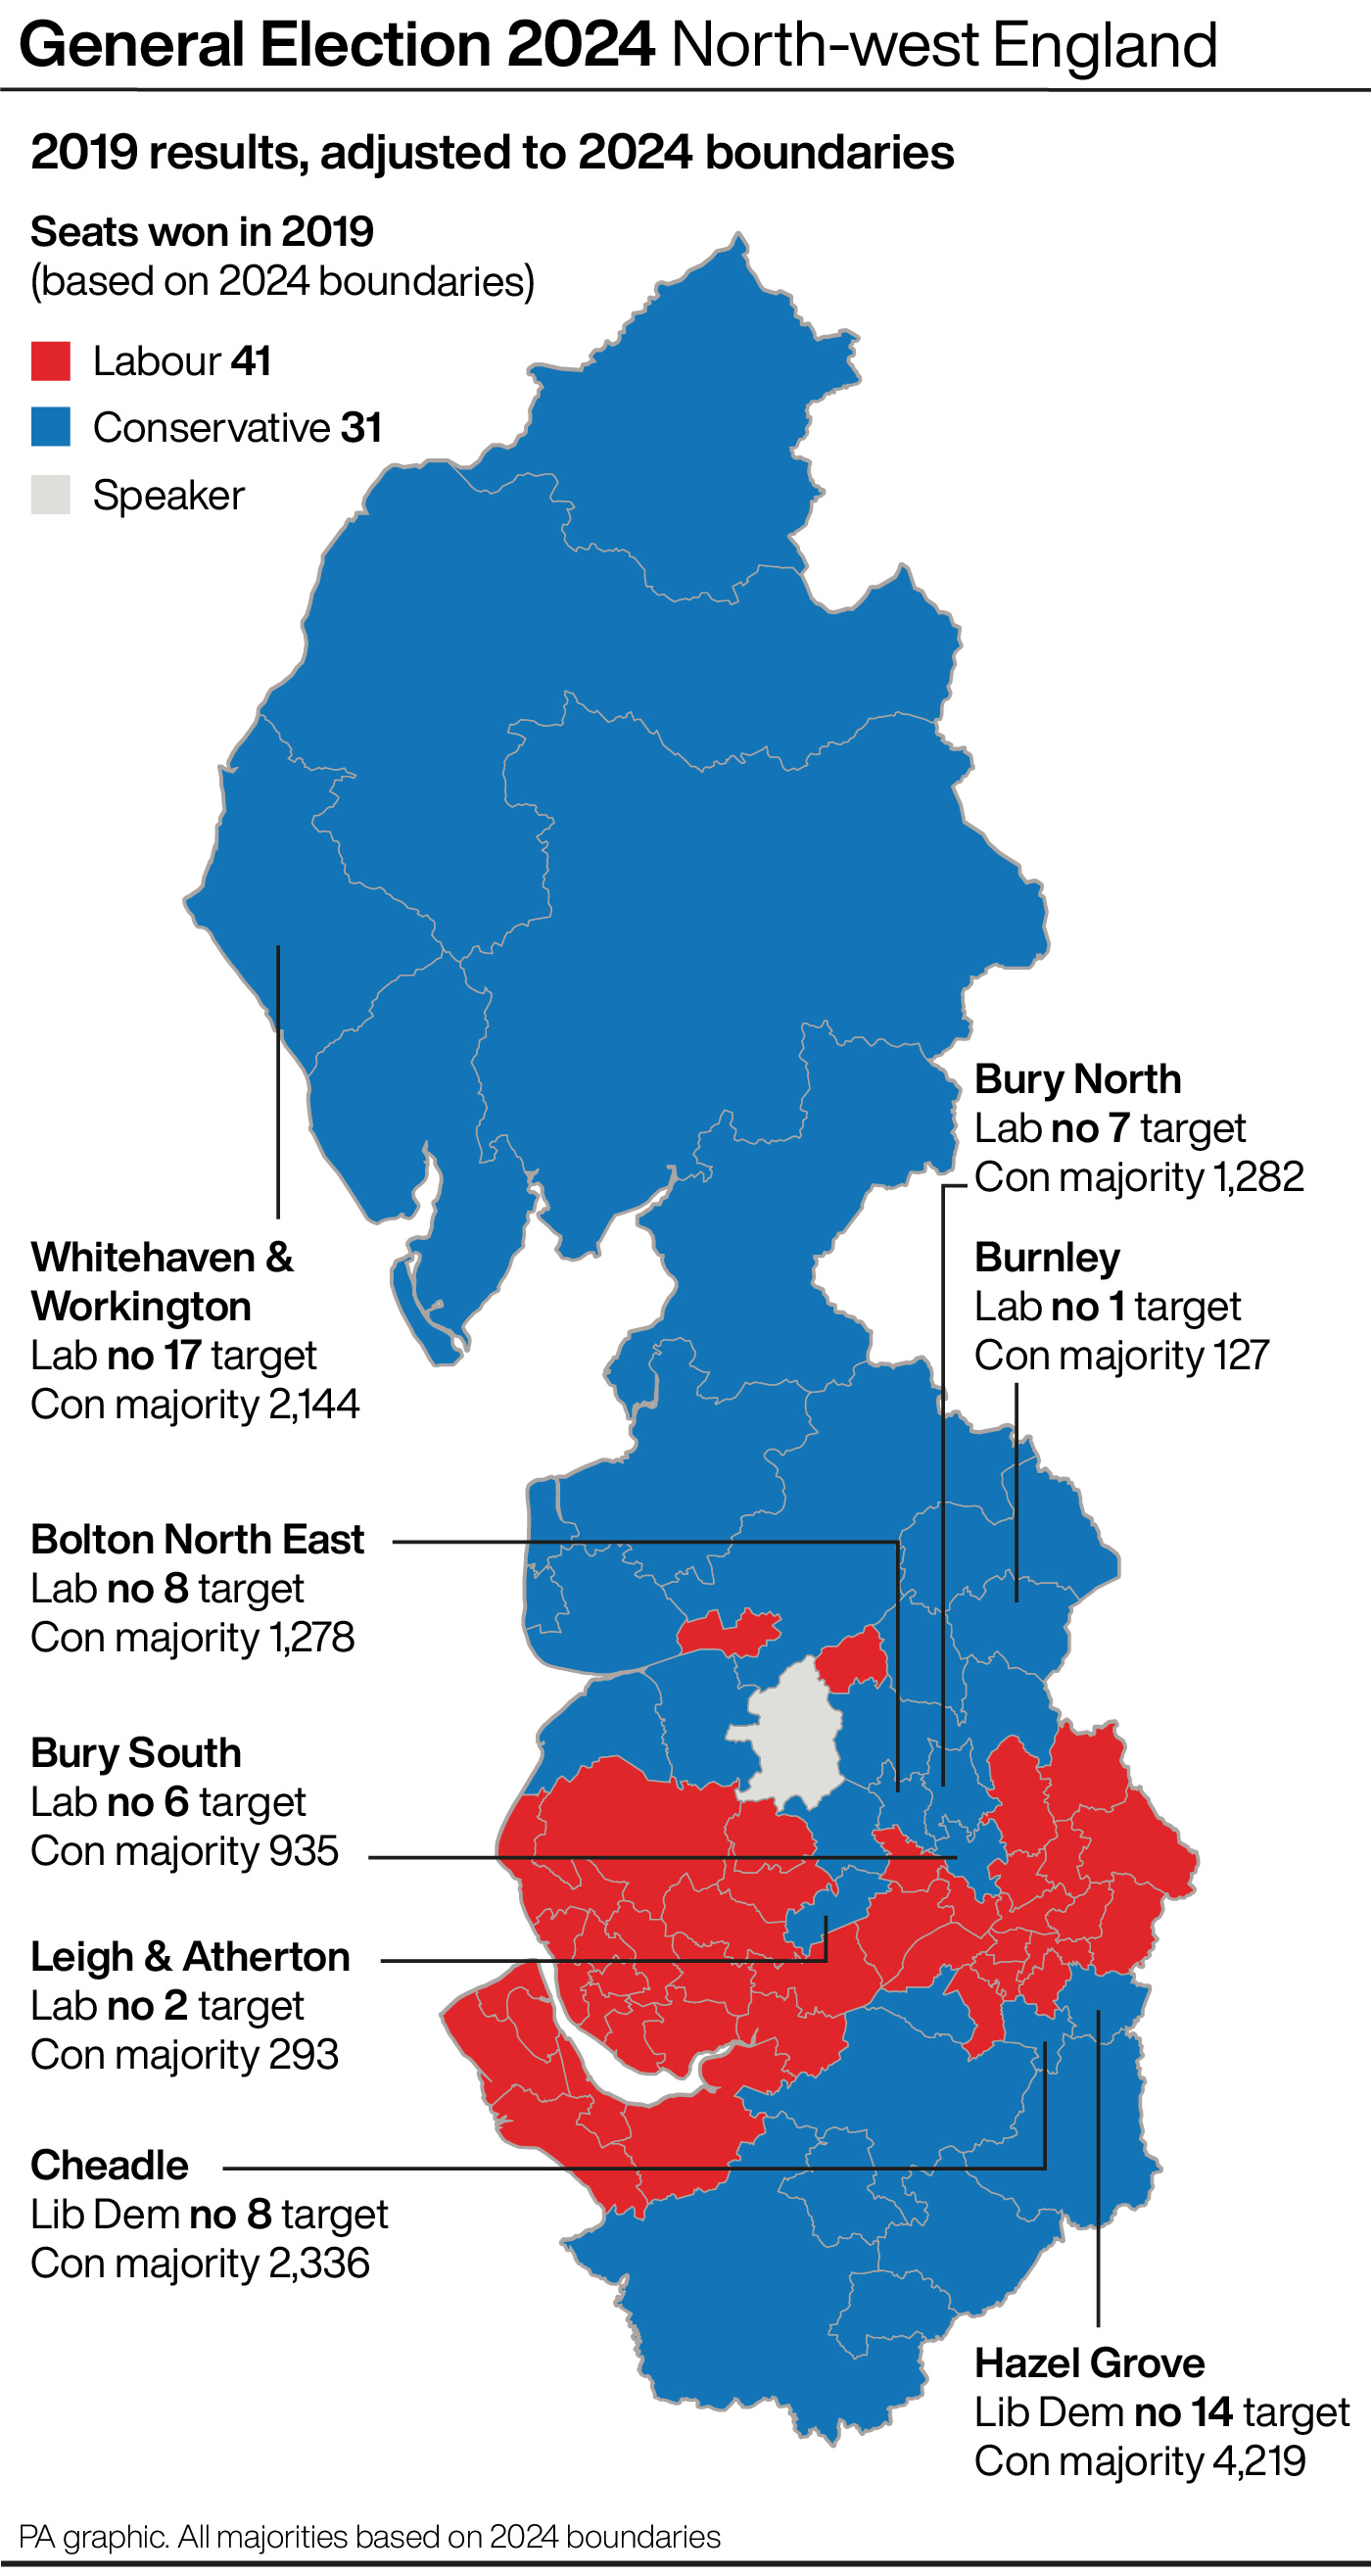 A map showing key battleground seats in north-west England at the General Election